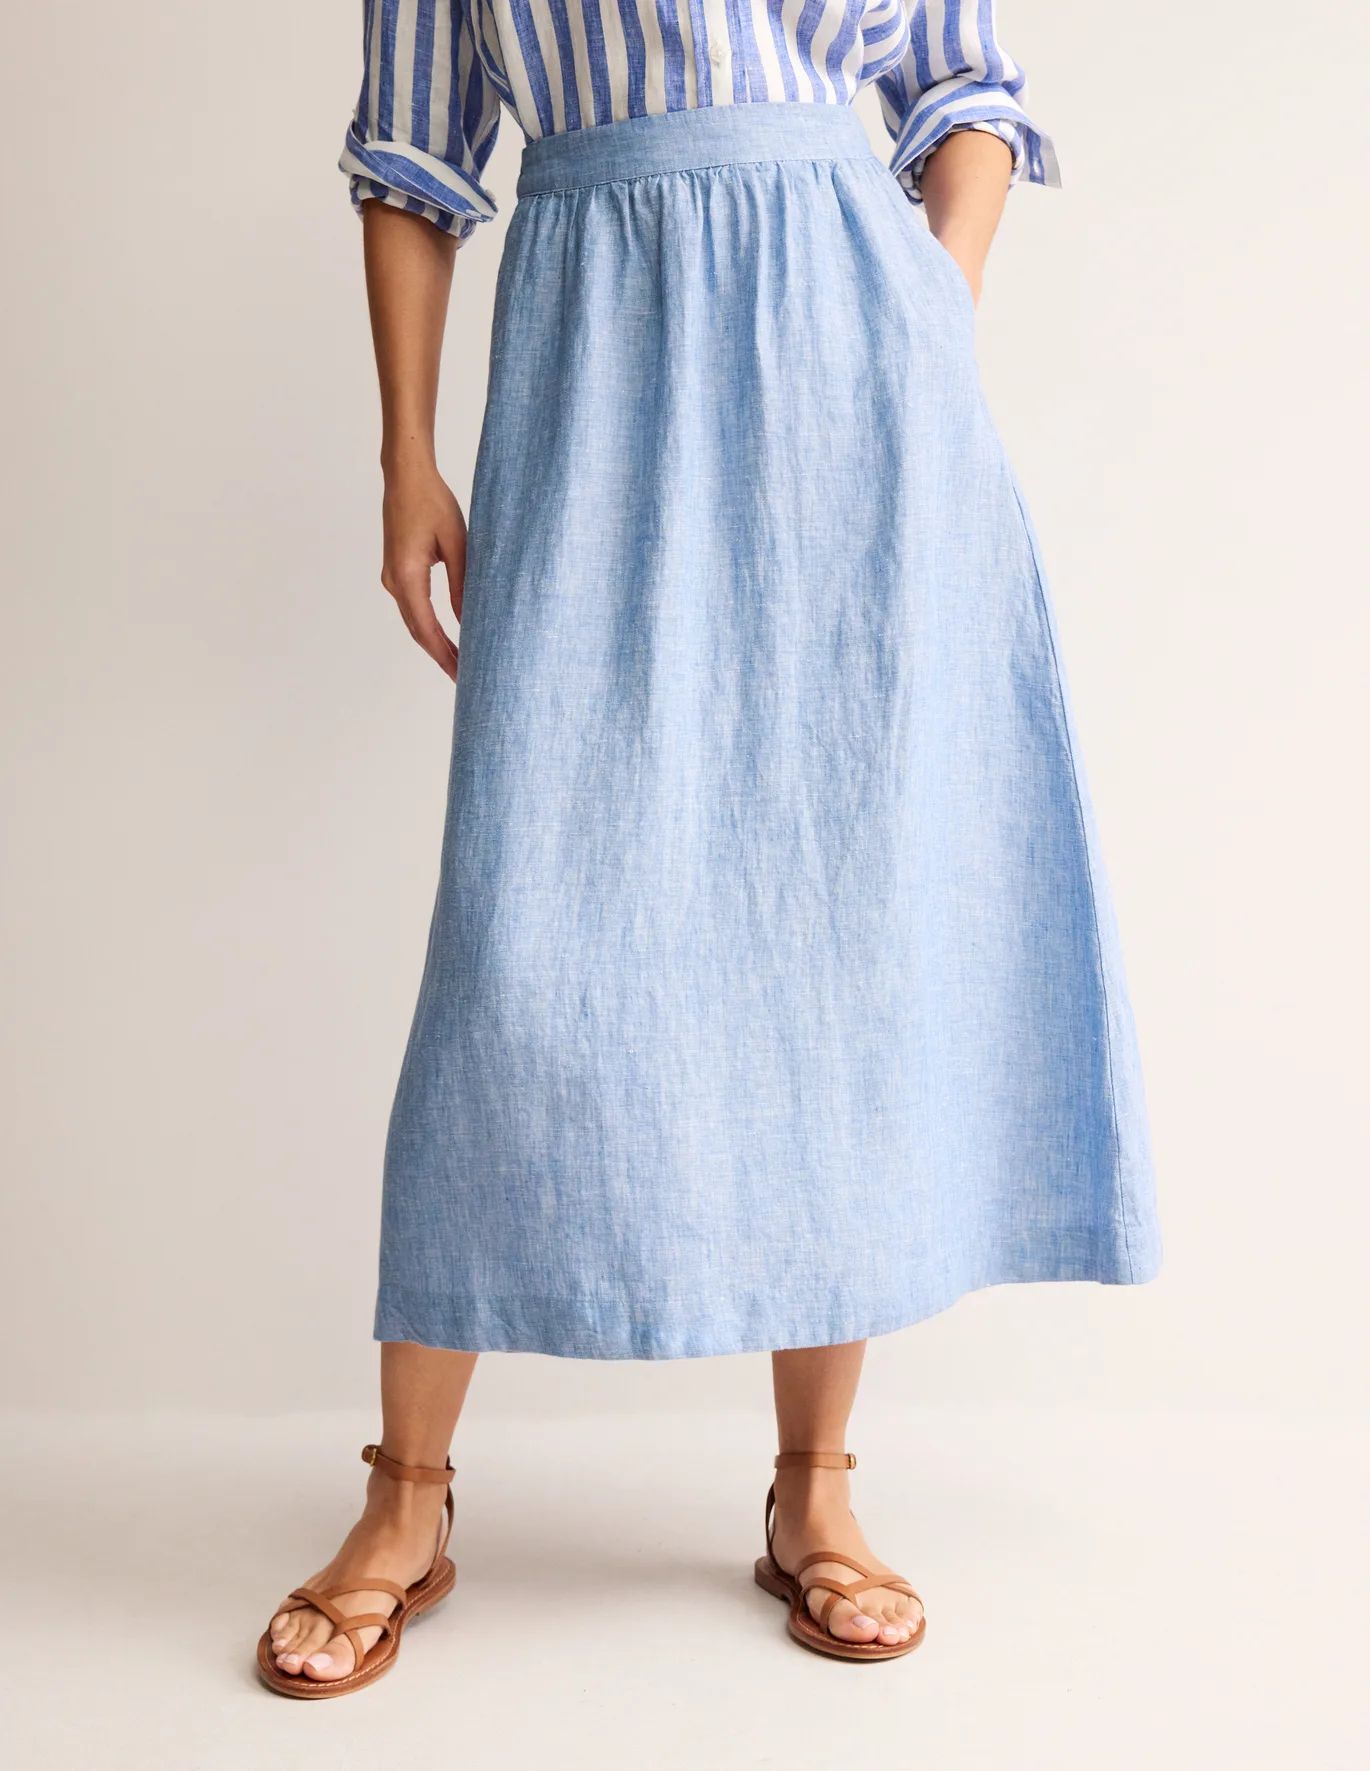 Chambray | Boden (US)